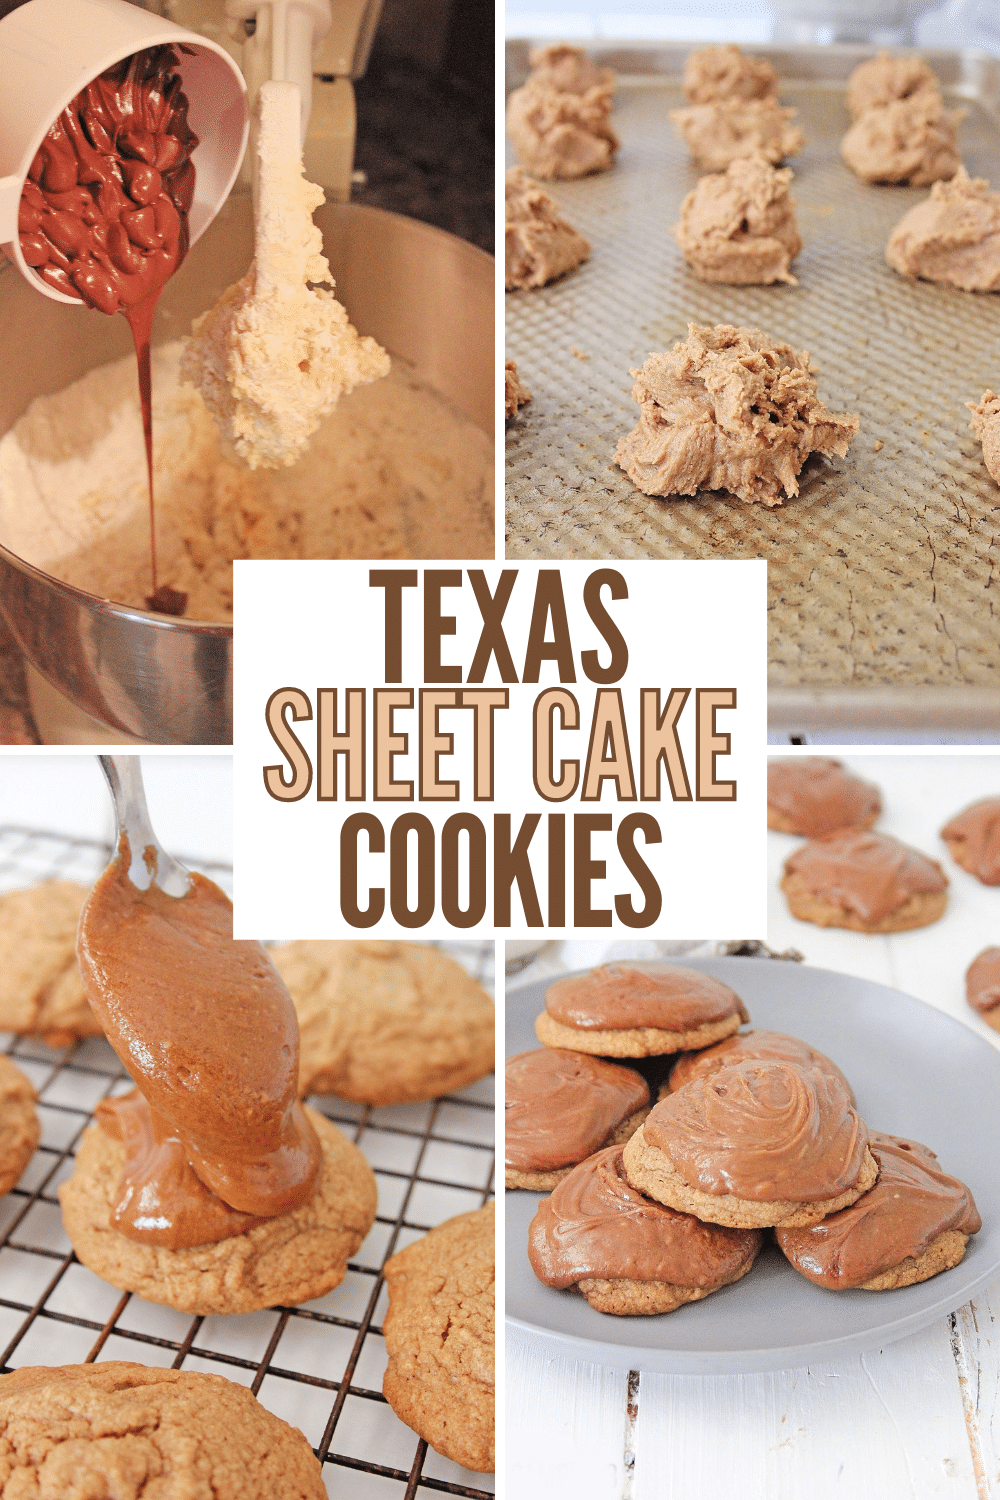 These Texas Sheet Cake Cookies are soft and chewy cookies that are sweet and chocolaty. The cookies are so delicious and everyone loves them! #texassheetcake #cookies #chocolate #chewycookies #recipe via @wondermomwannab